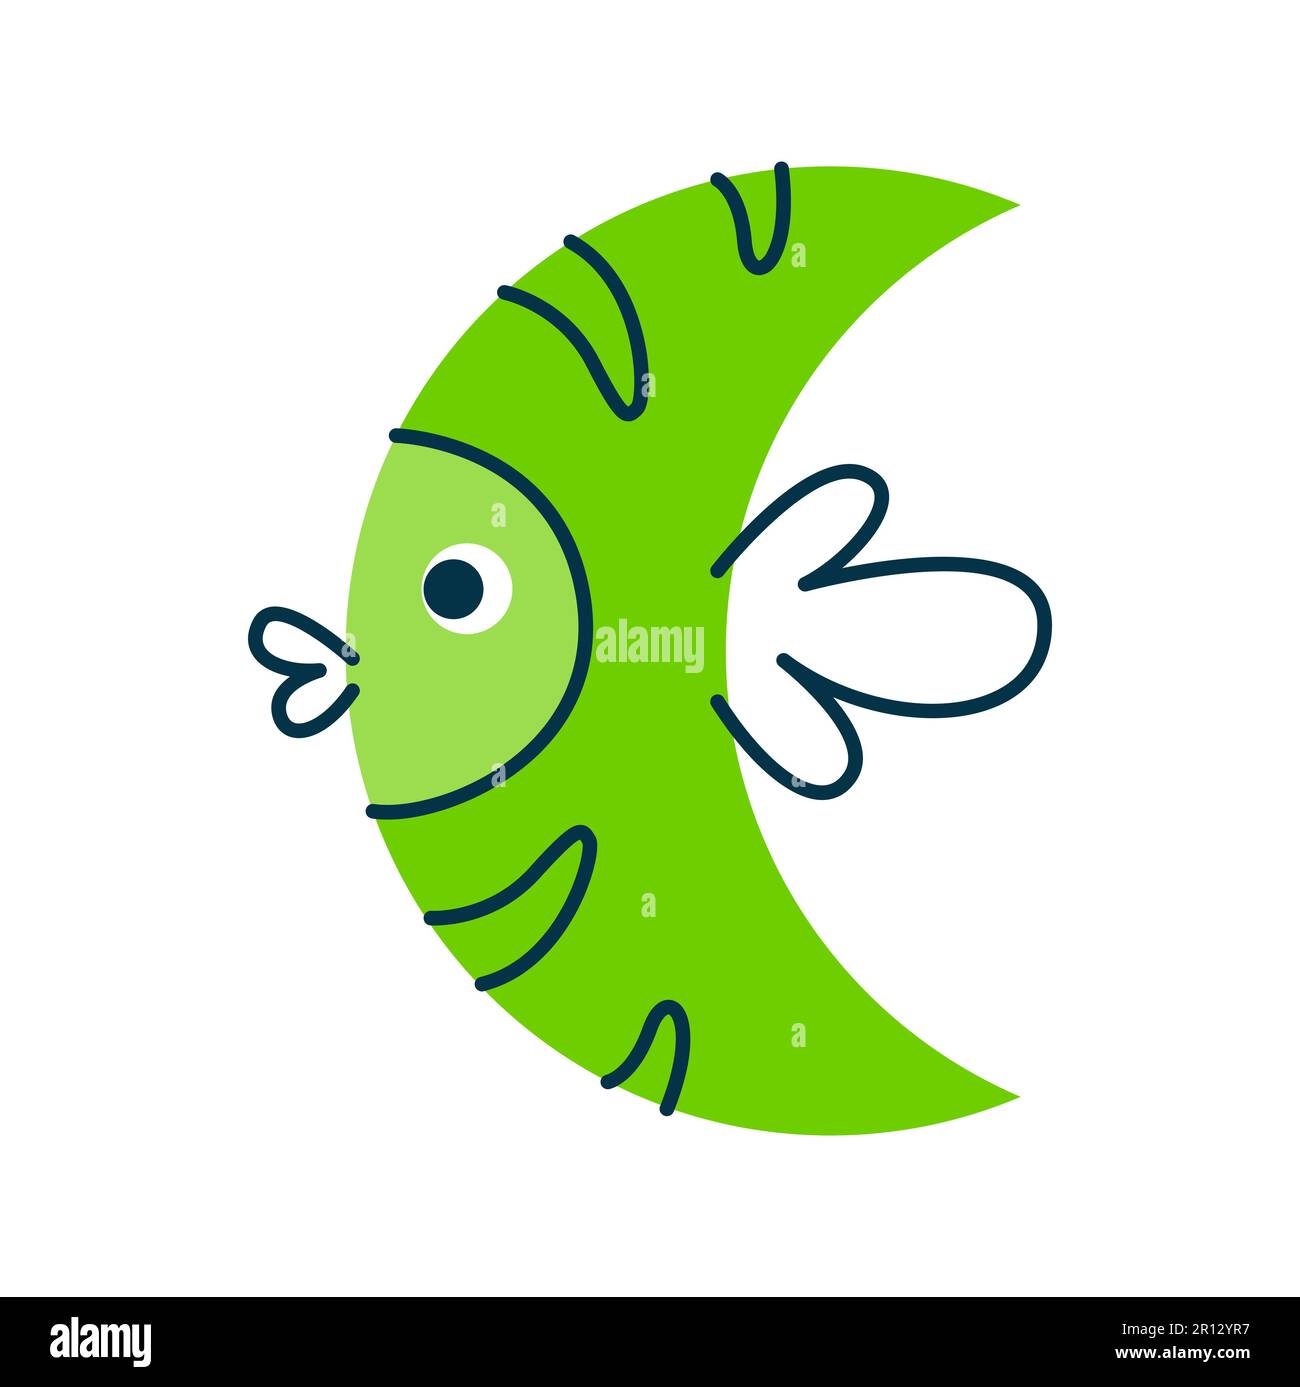 Fish cartoon character with funny face, math shape, emotion of